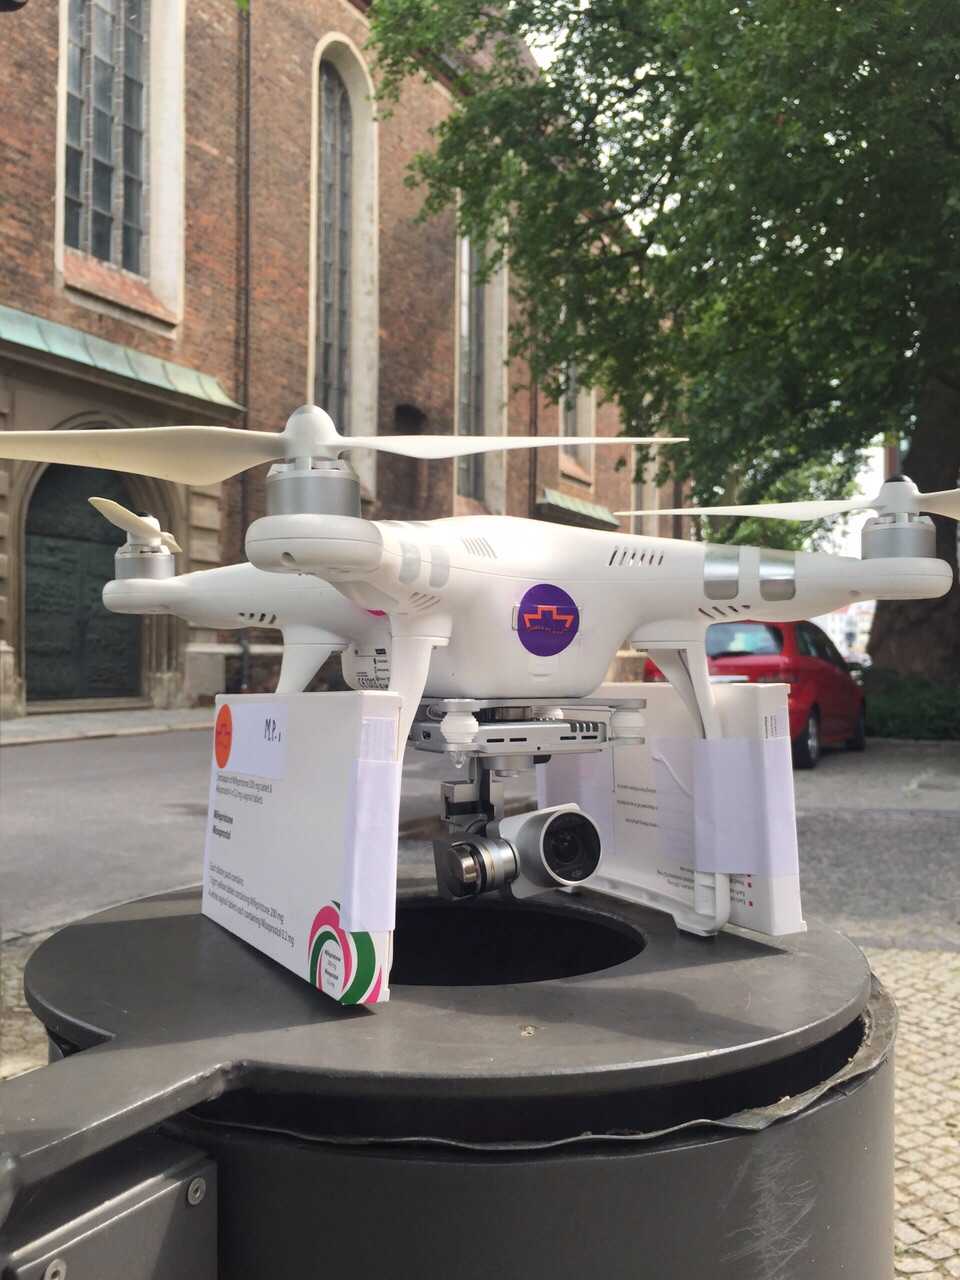 Drone waiting for take off